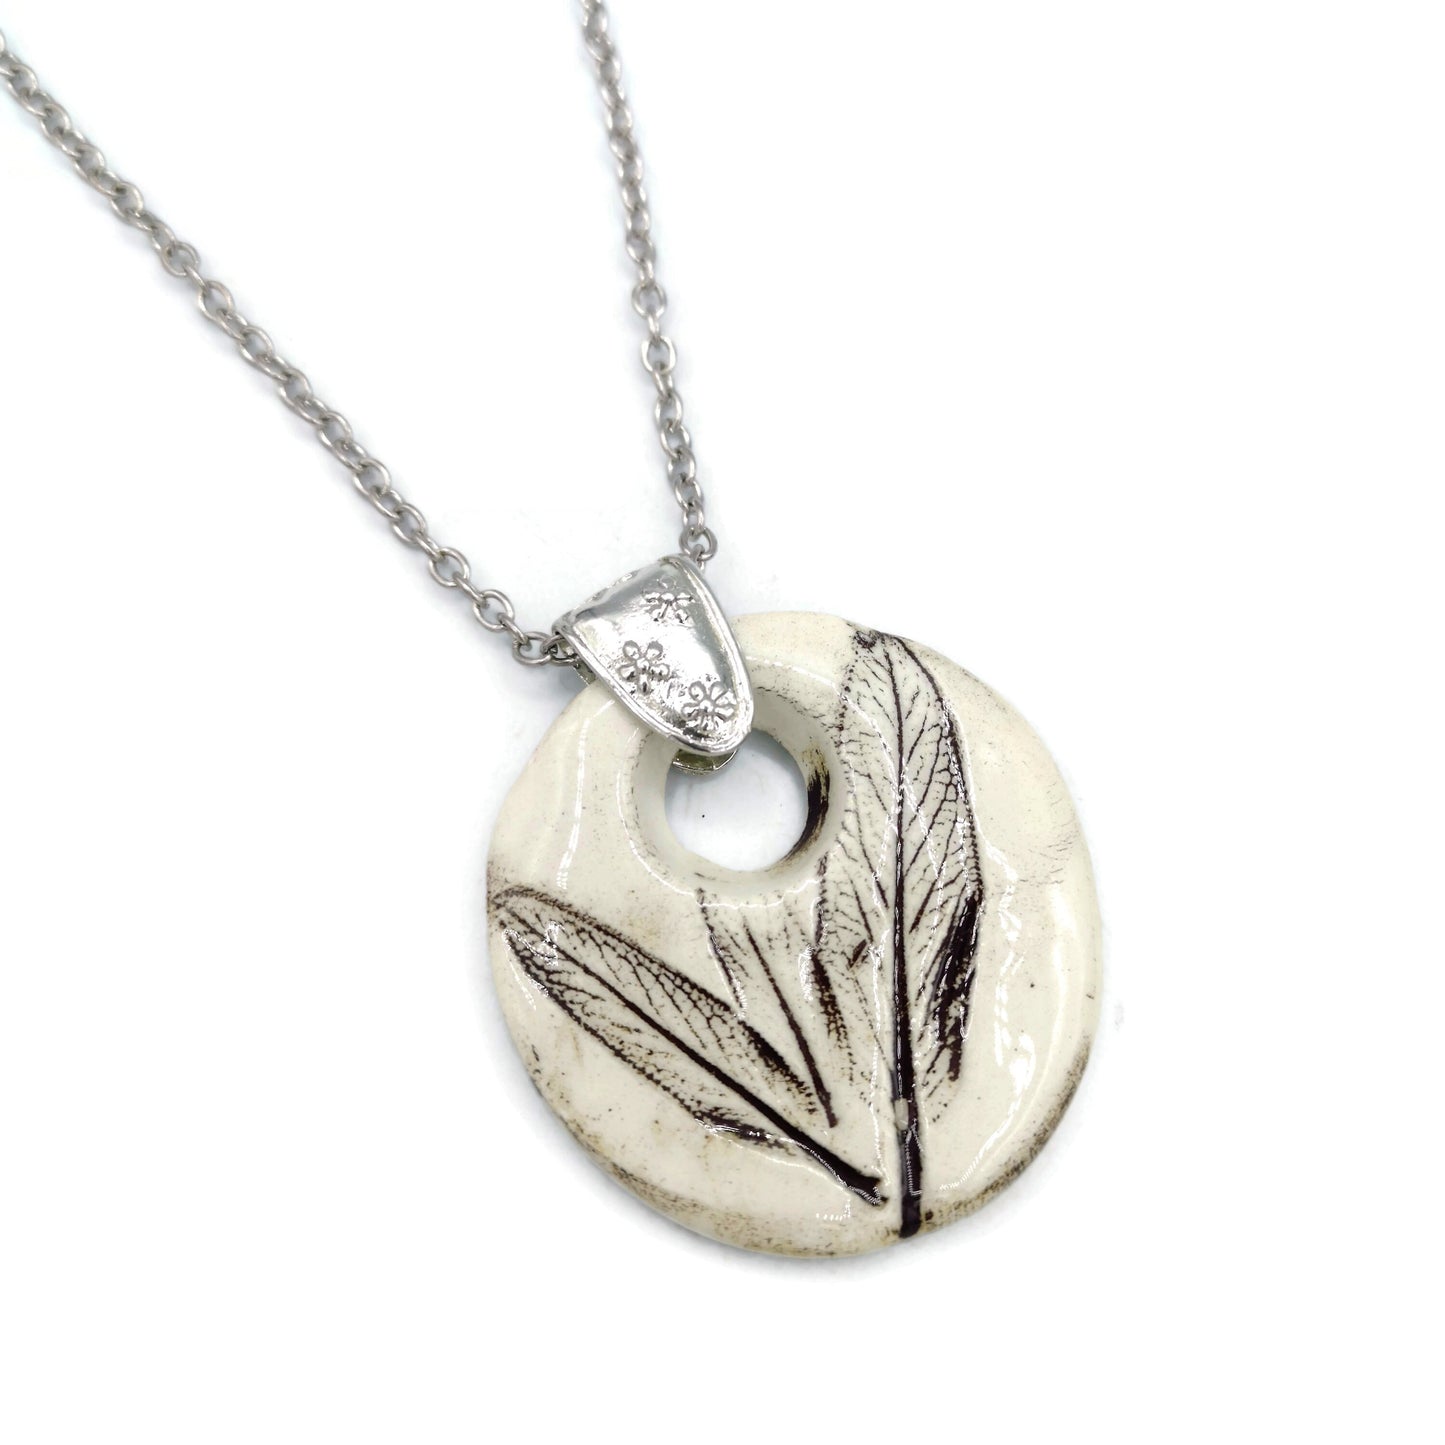 Leaf Choker Necklace Pendant, Best Gifts For Her, Everyday Necklace Plant Mom Gift For Women, Mom Birthday gift From Daughter - Ceramica Ana Rafael